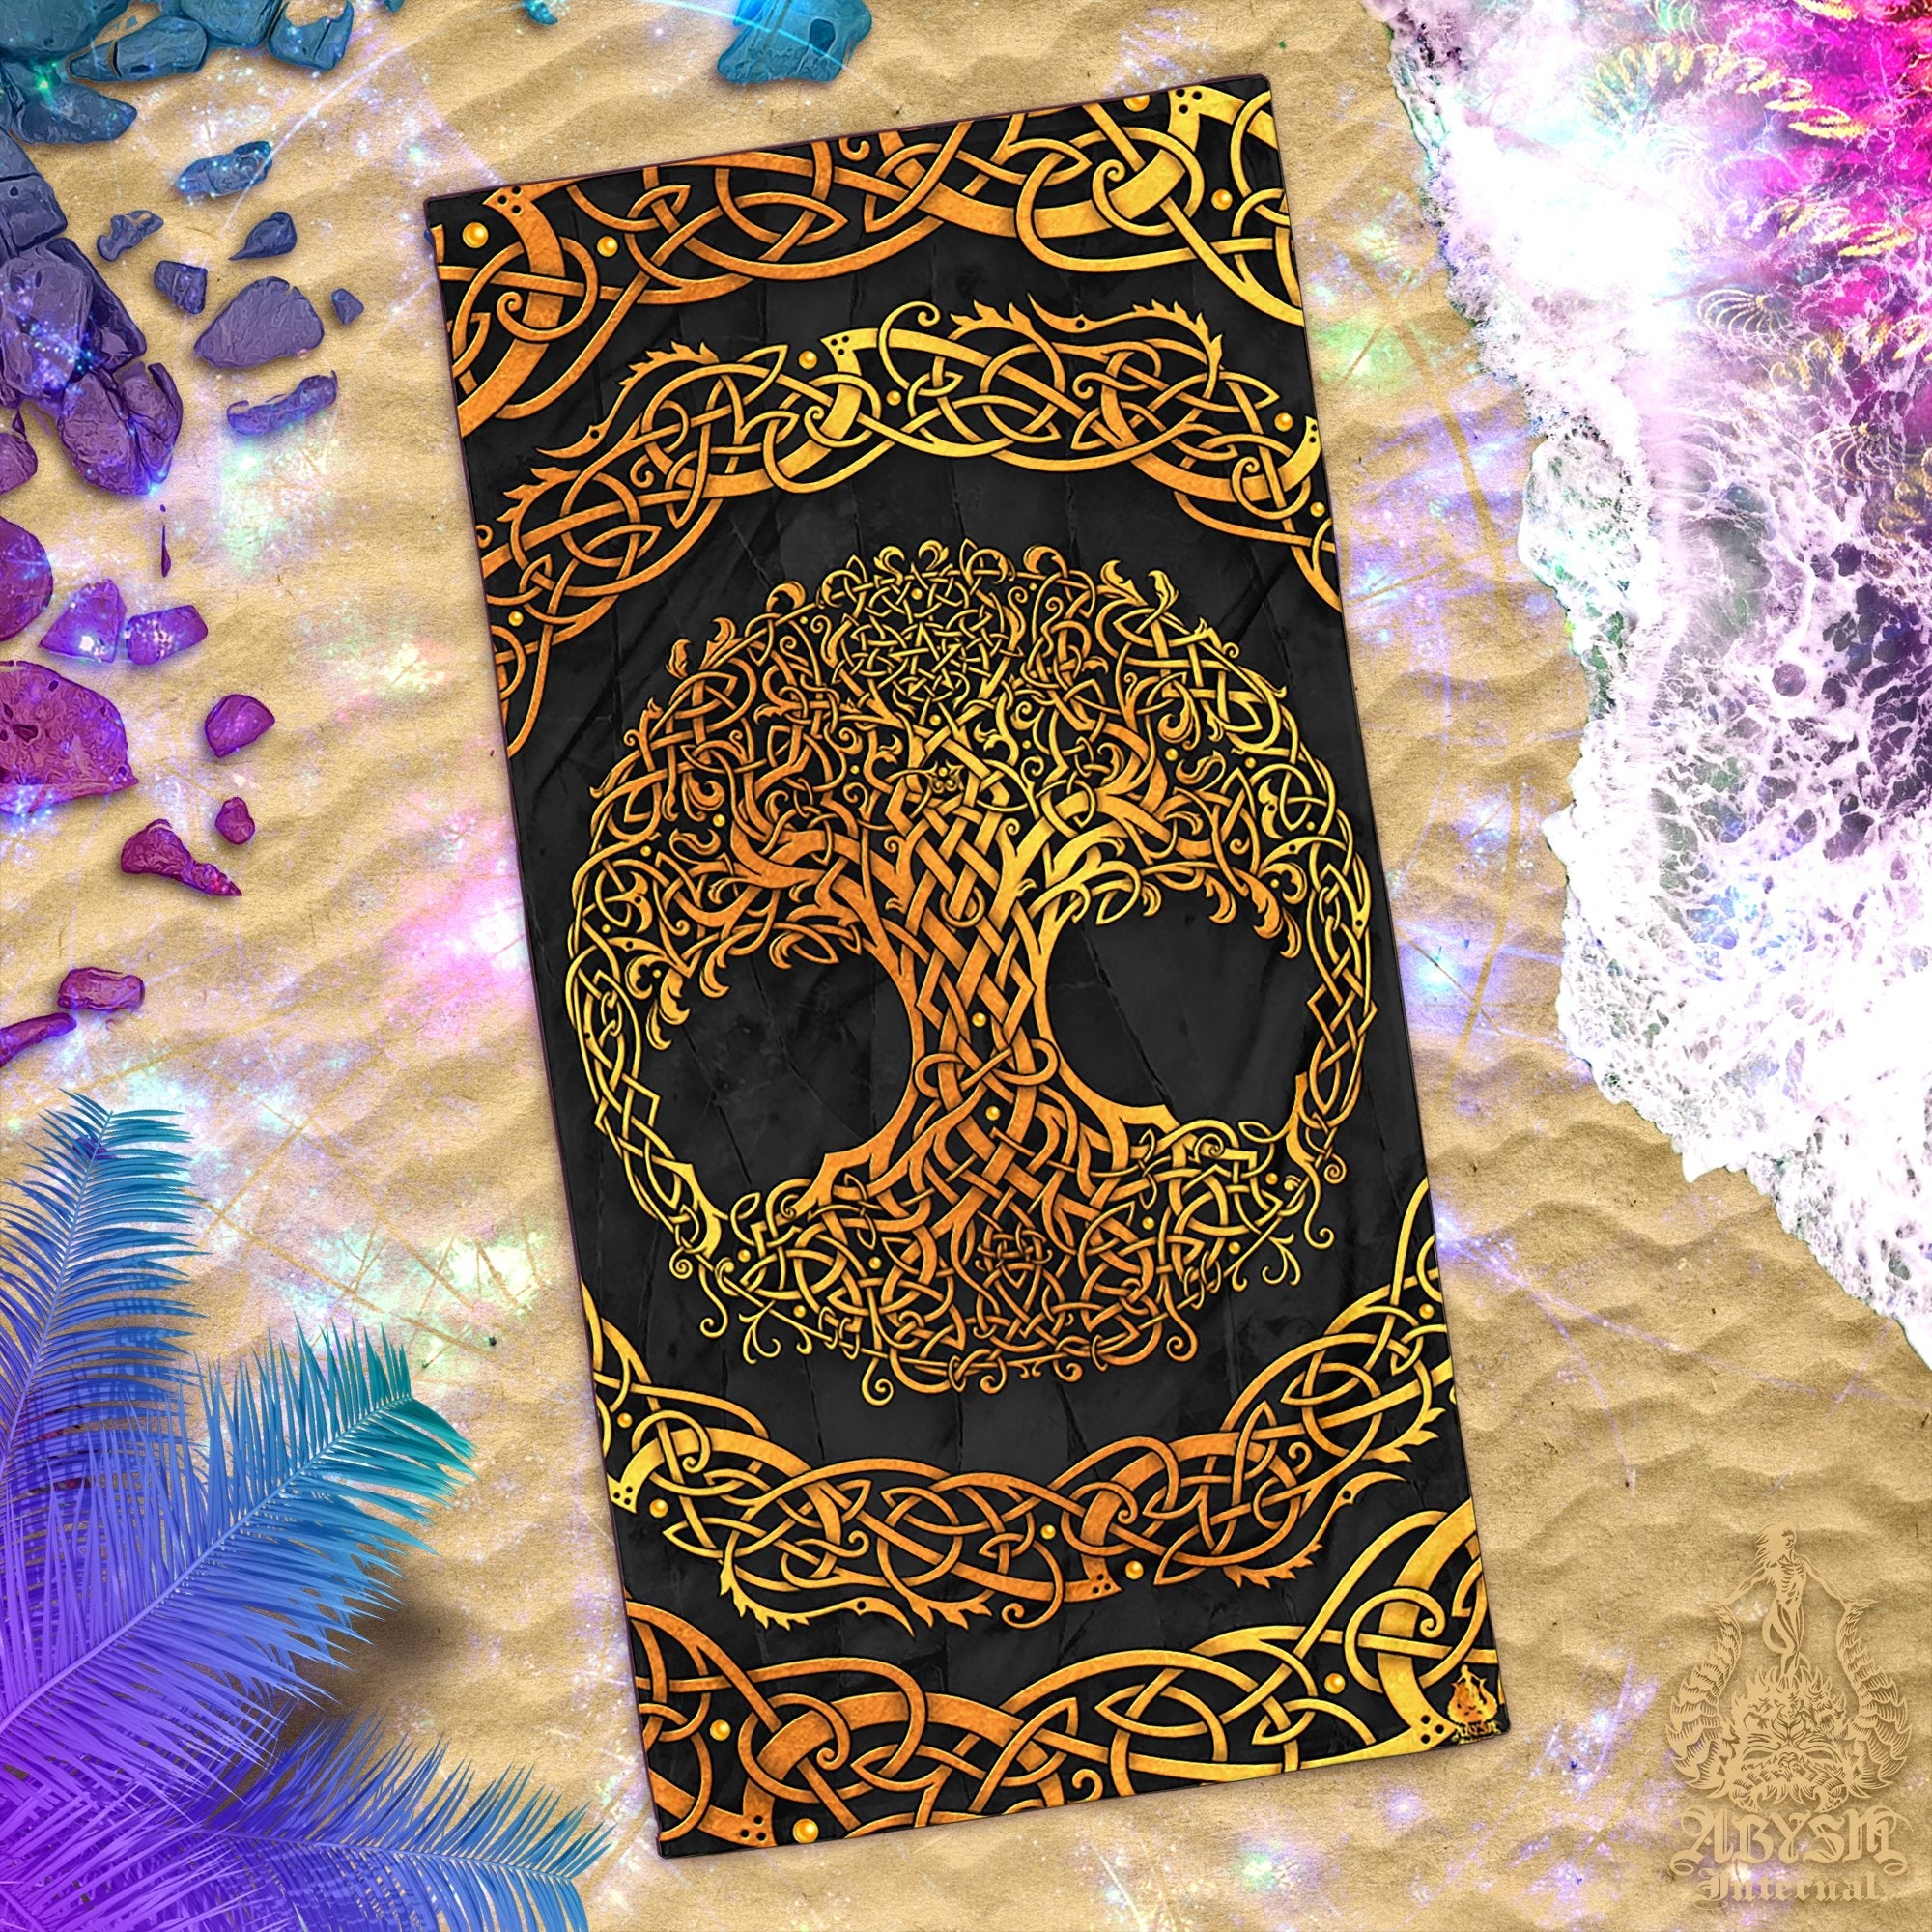 ALL Tree of Life Beach Towel Designs, Celtic Knots, Witch and Pagan Art - Cyan Blue & Gold, Cream, White, Psy, 12 Colors - Abysm Internal